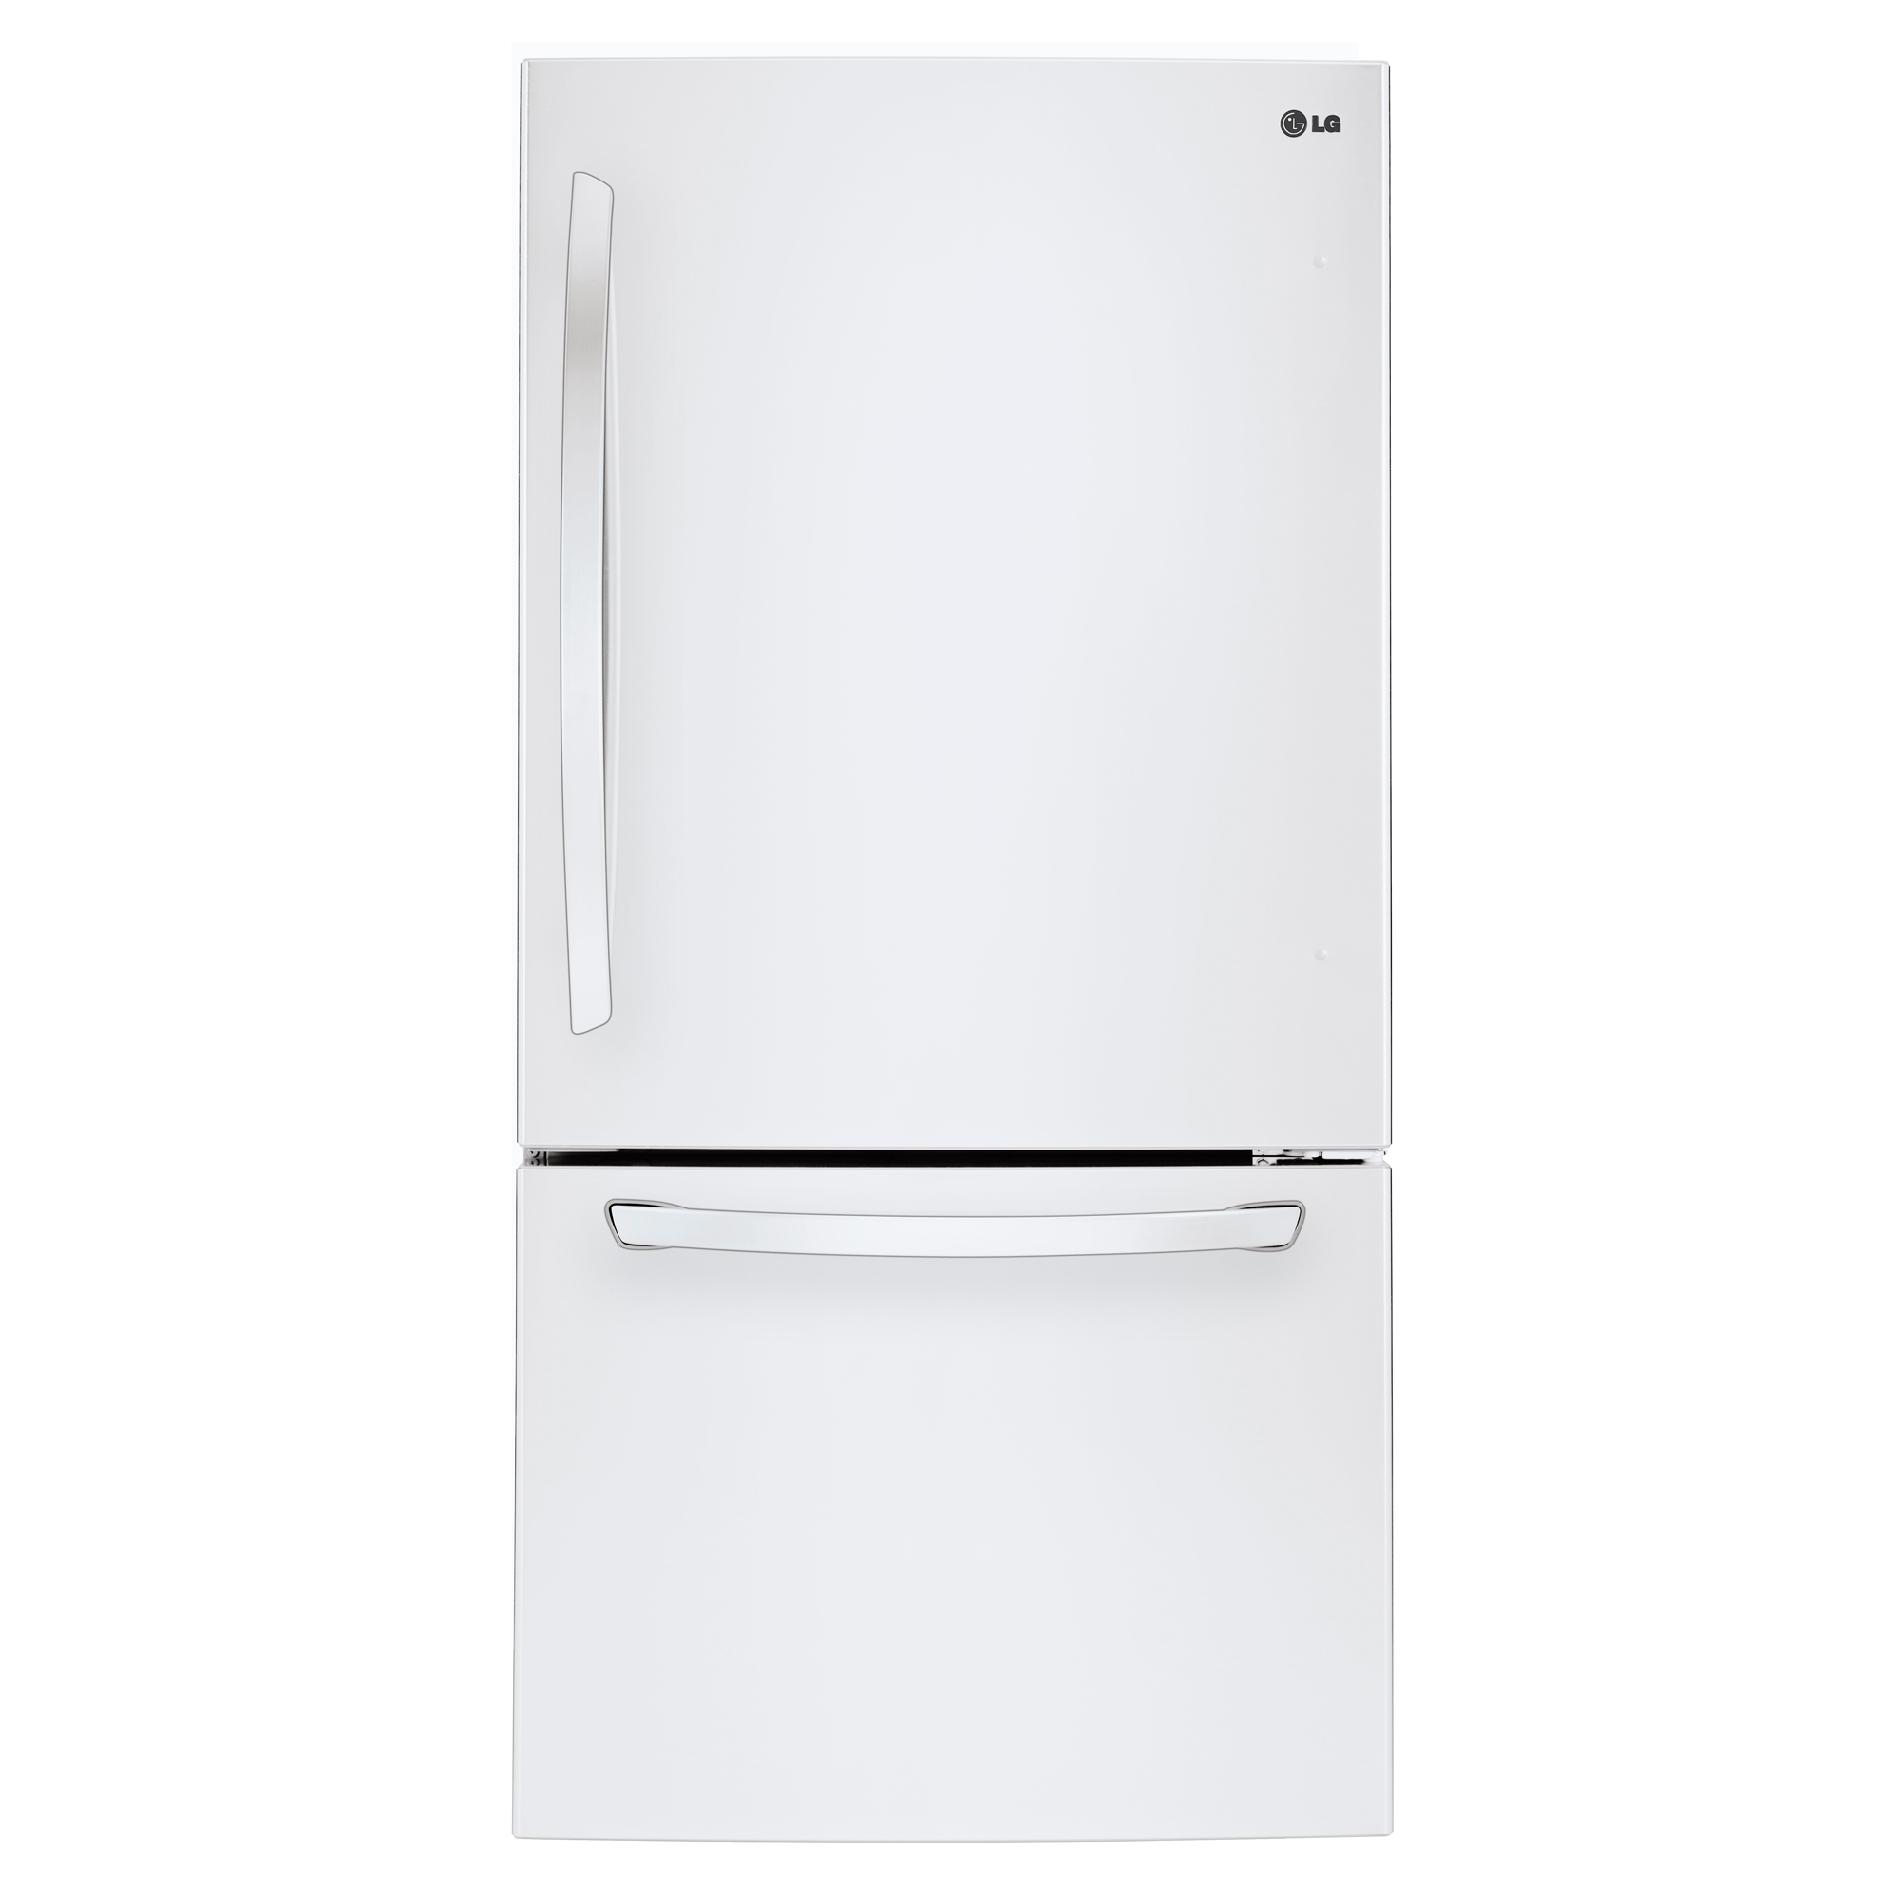 Find Kenmore Available In The Single Door Bottom Freezer Refrigerators Section at Sears.